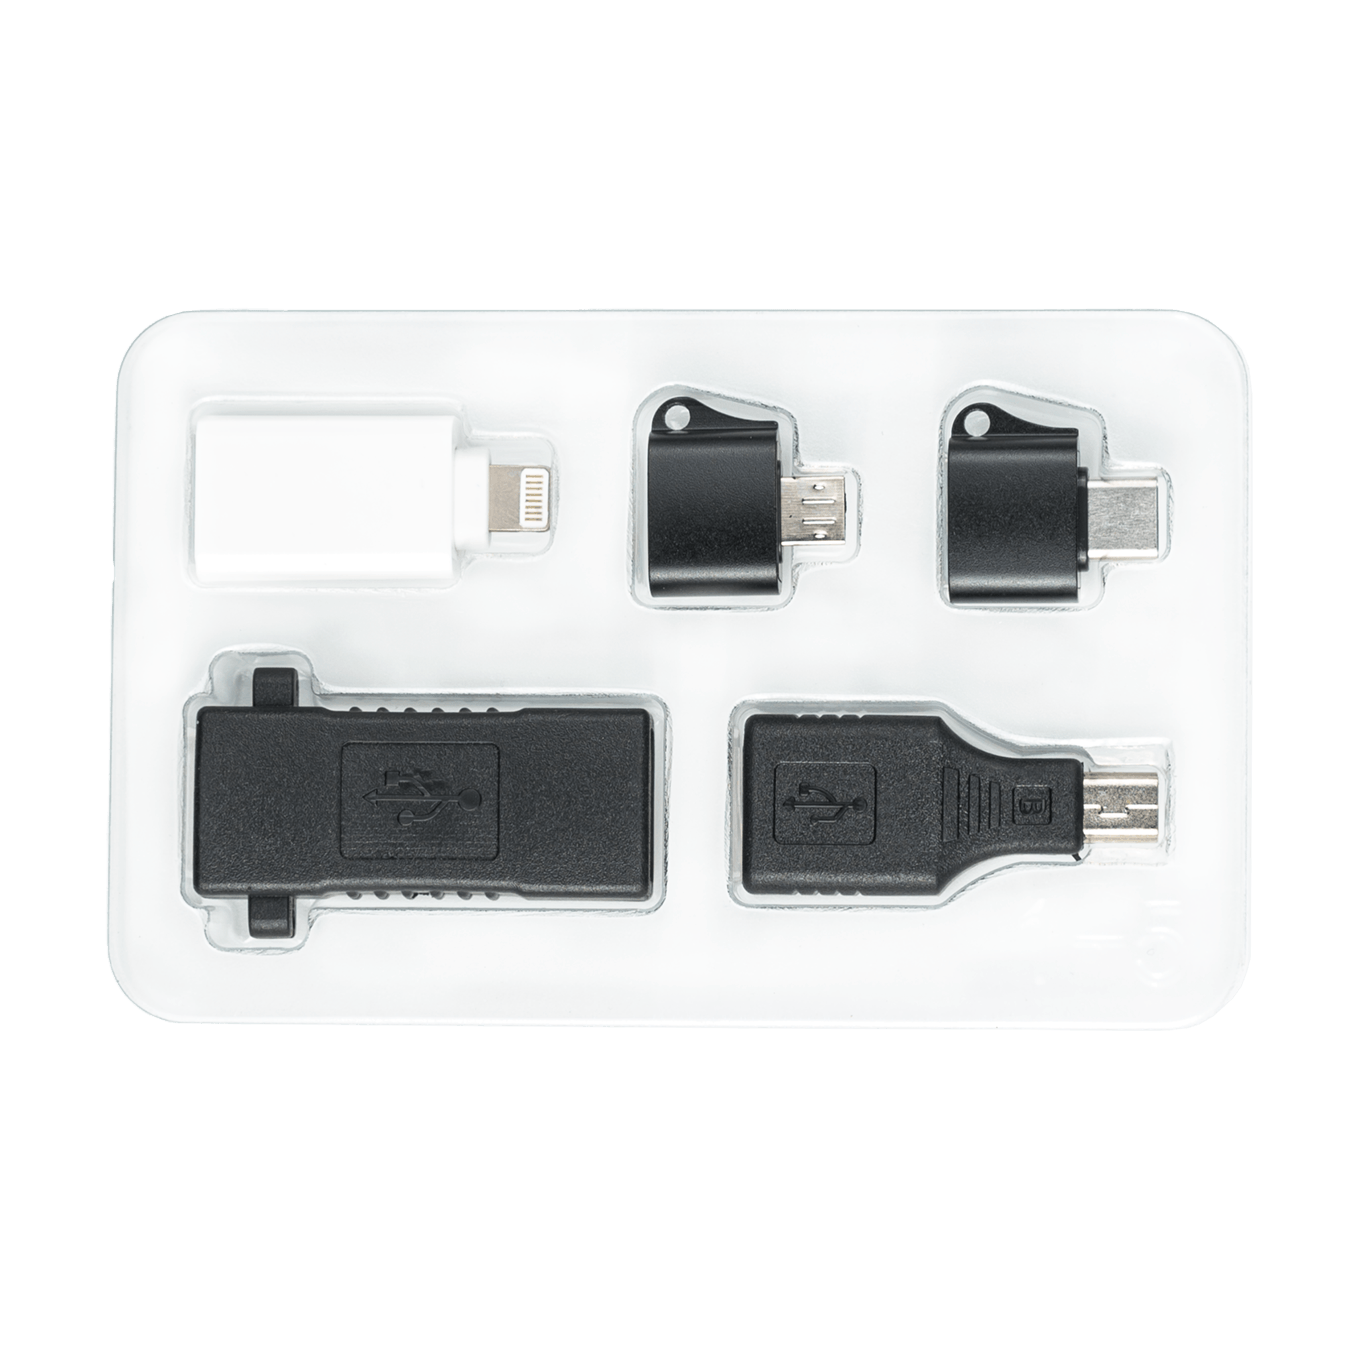 USB Killer now lets you fry most Lightning and USB-C devices for $55